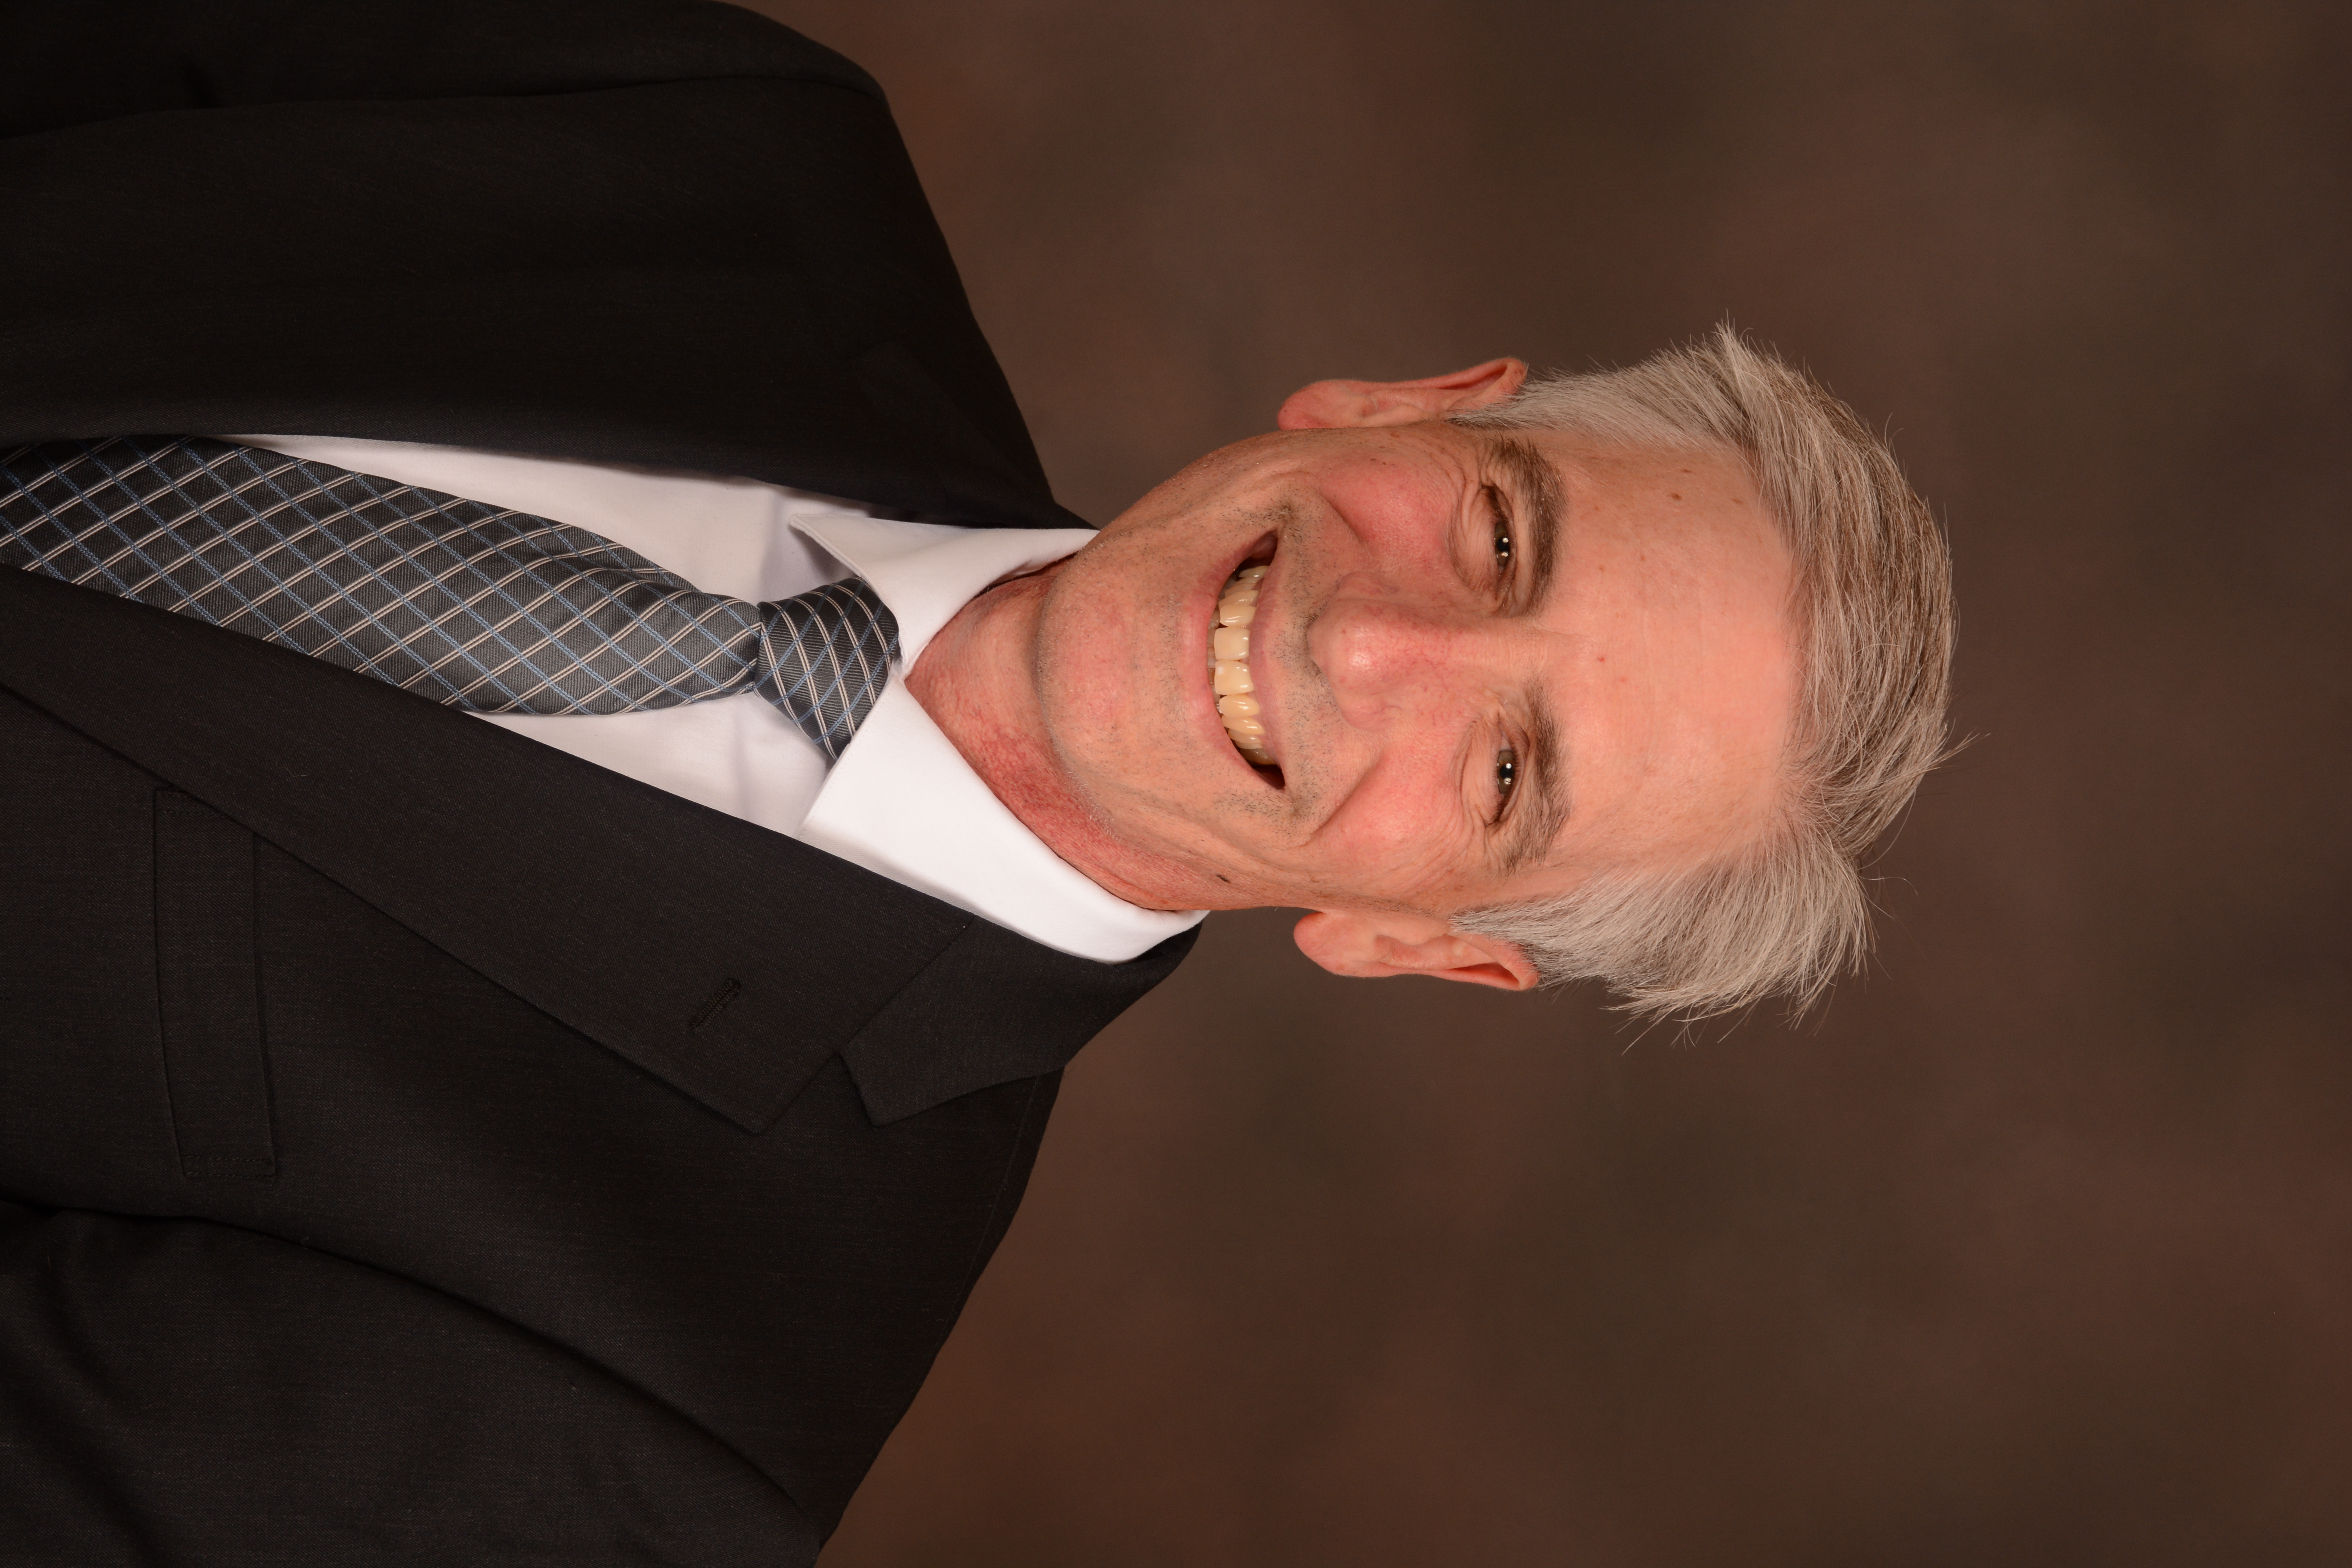 Dr Steve Erickson is wearing a suit, smiling, and has short white hair.